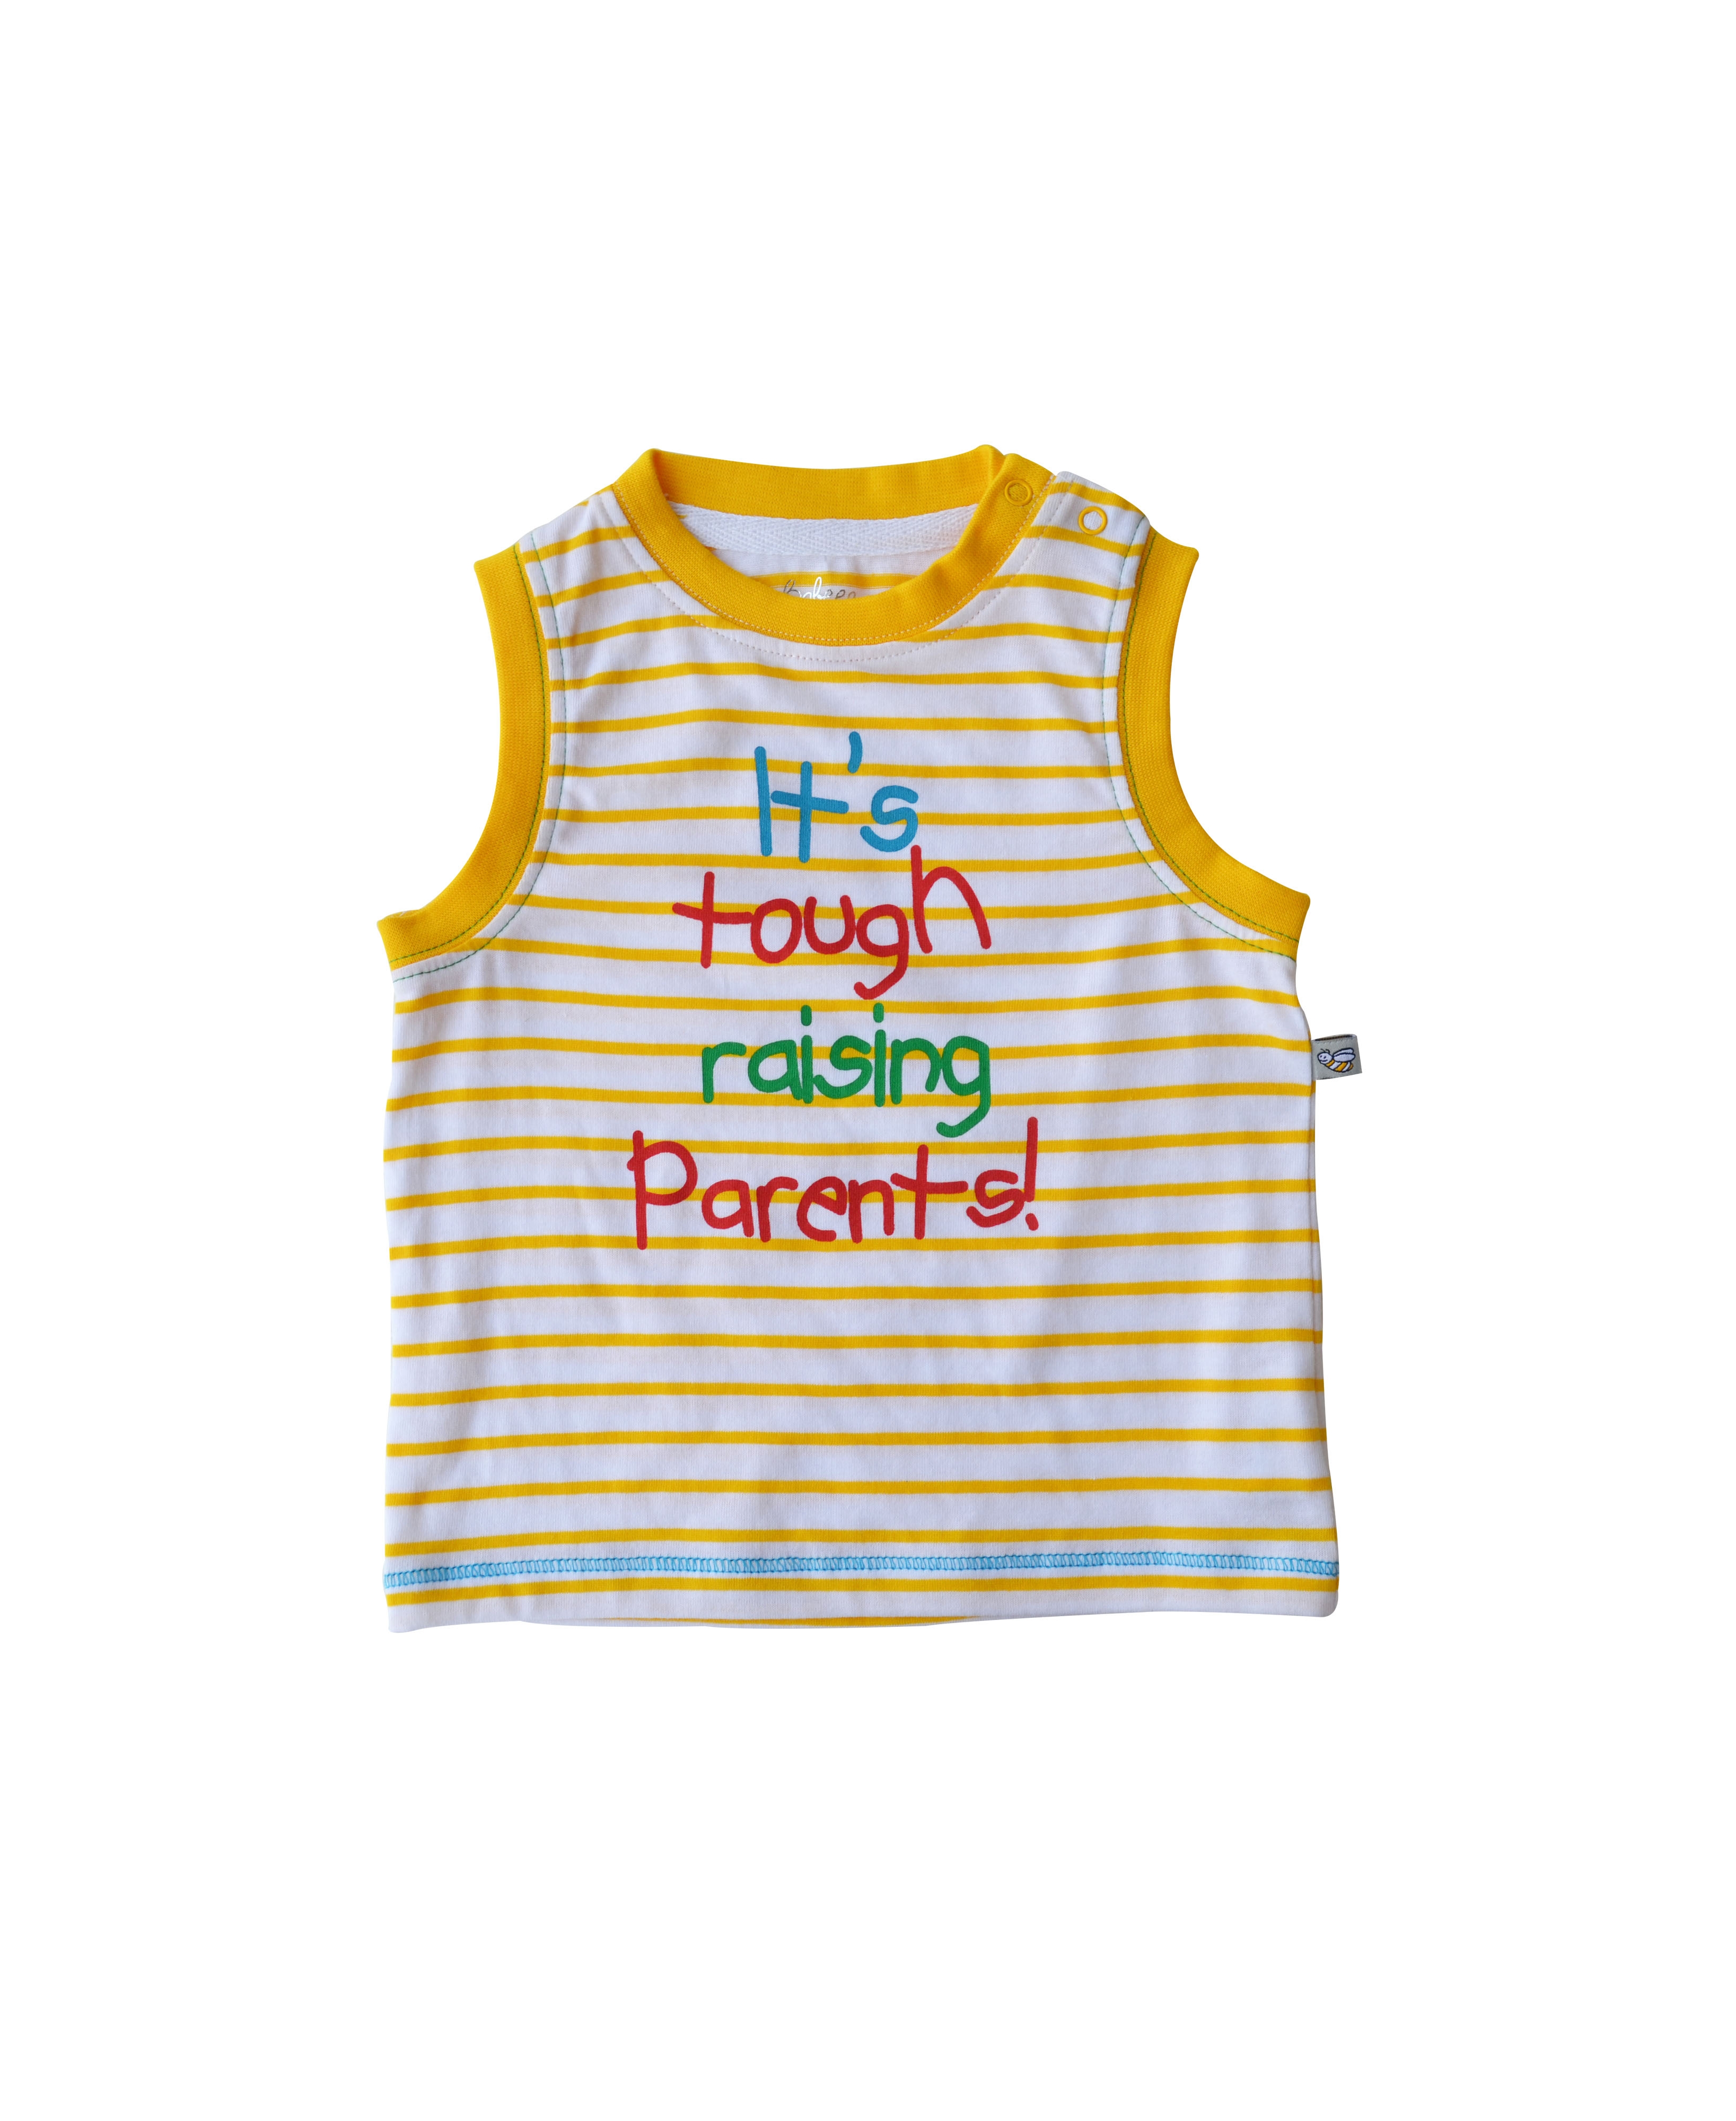 Babeez | White/Yellow stripes Vest with Chest Print (100% Cotton Single Jersey) undefined